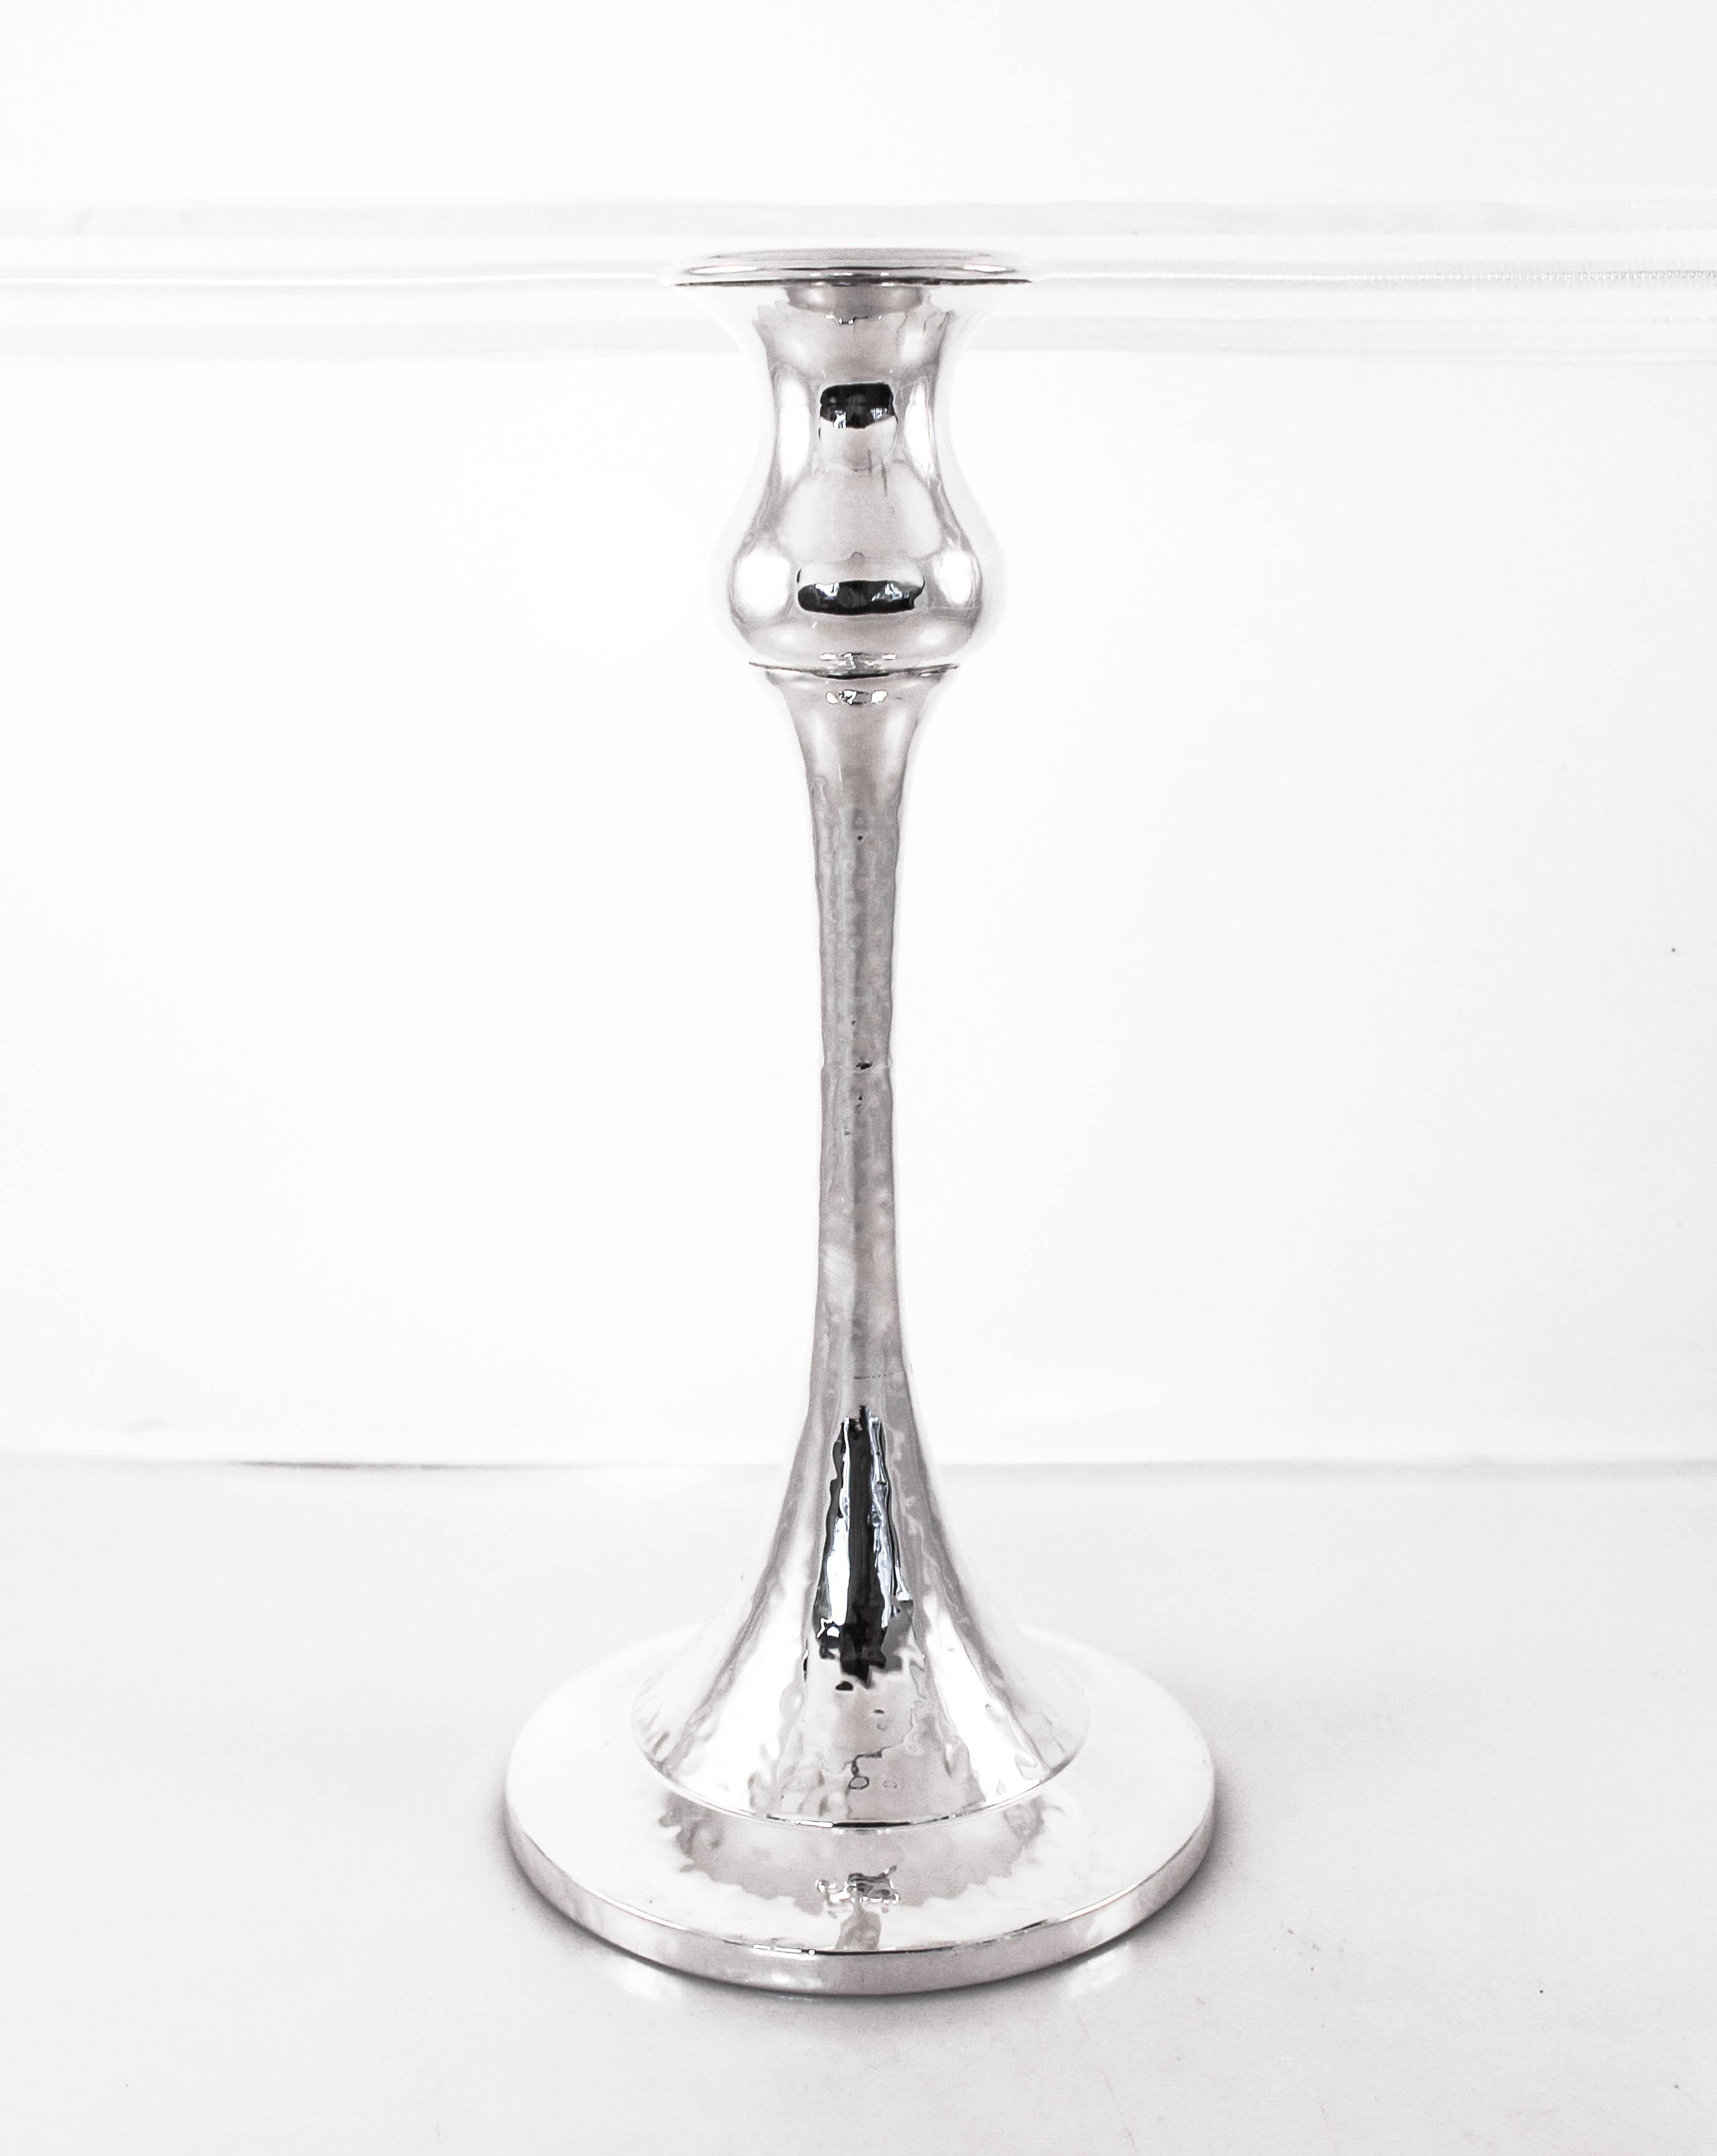 A pair of hammered sterling silver candlesticks that have a young and modern feel. They are regal and beautiful; any bride will be proud to use them.